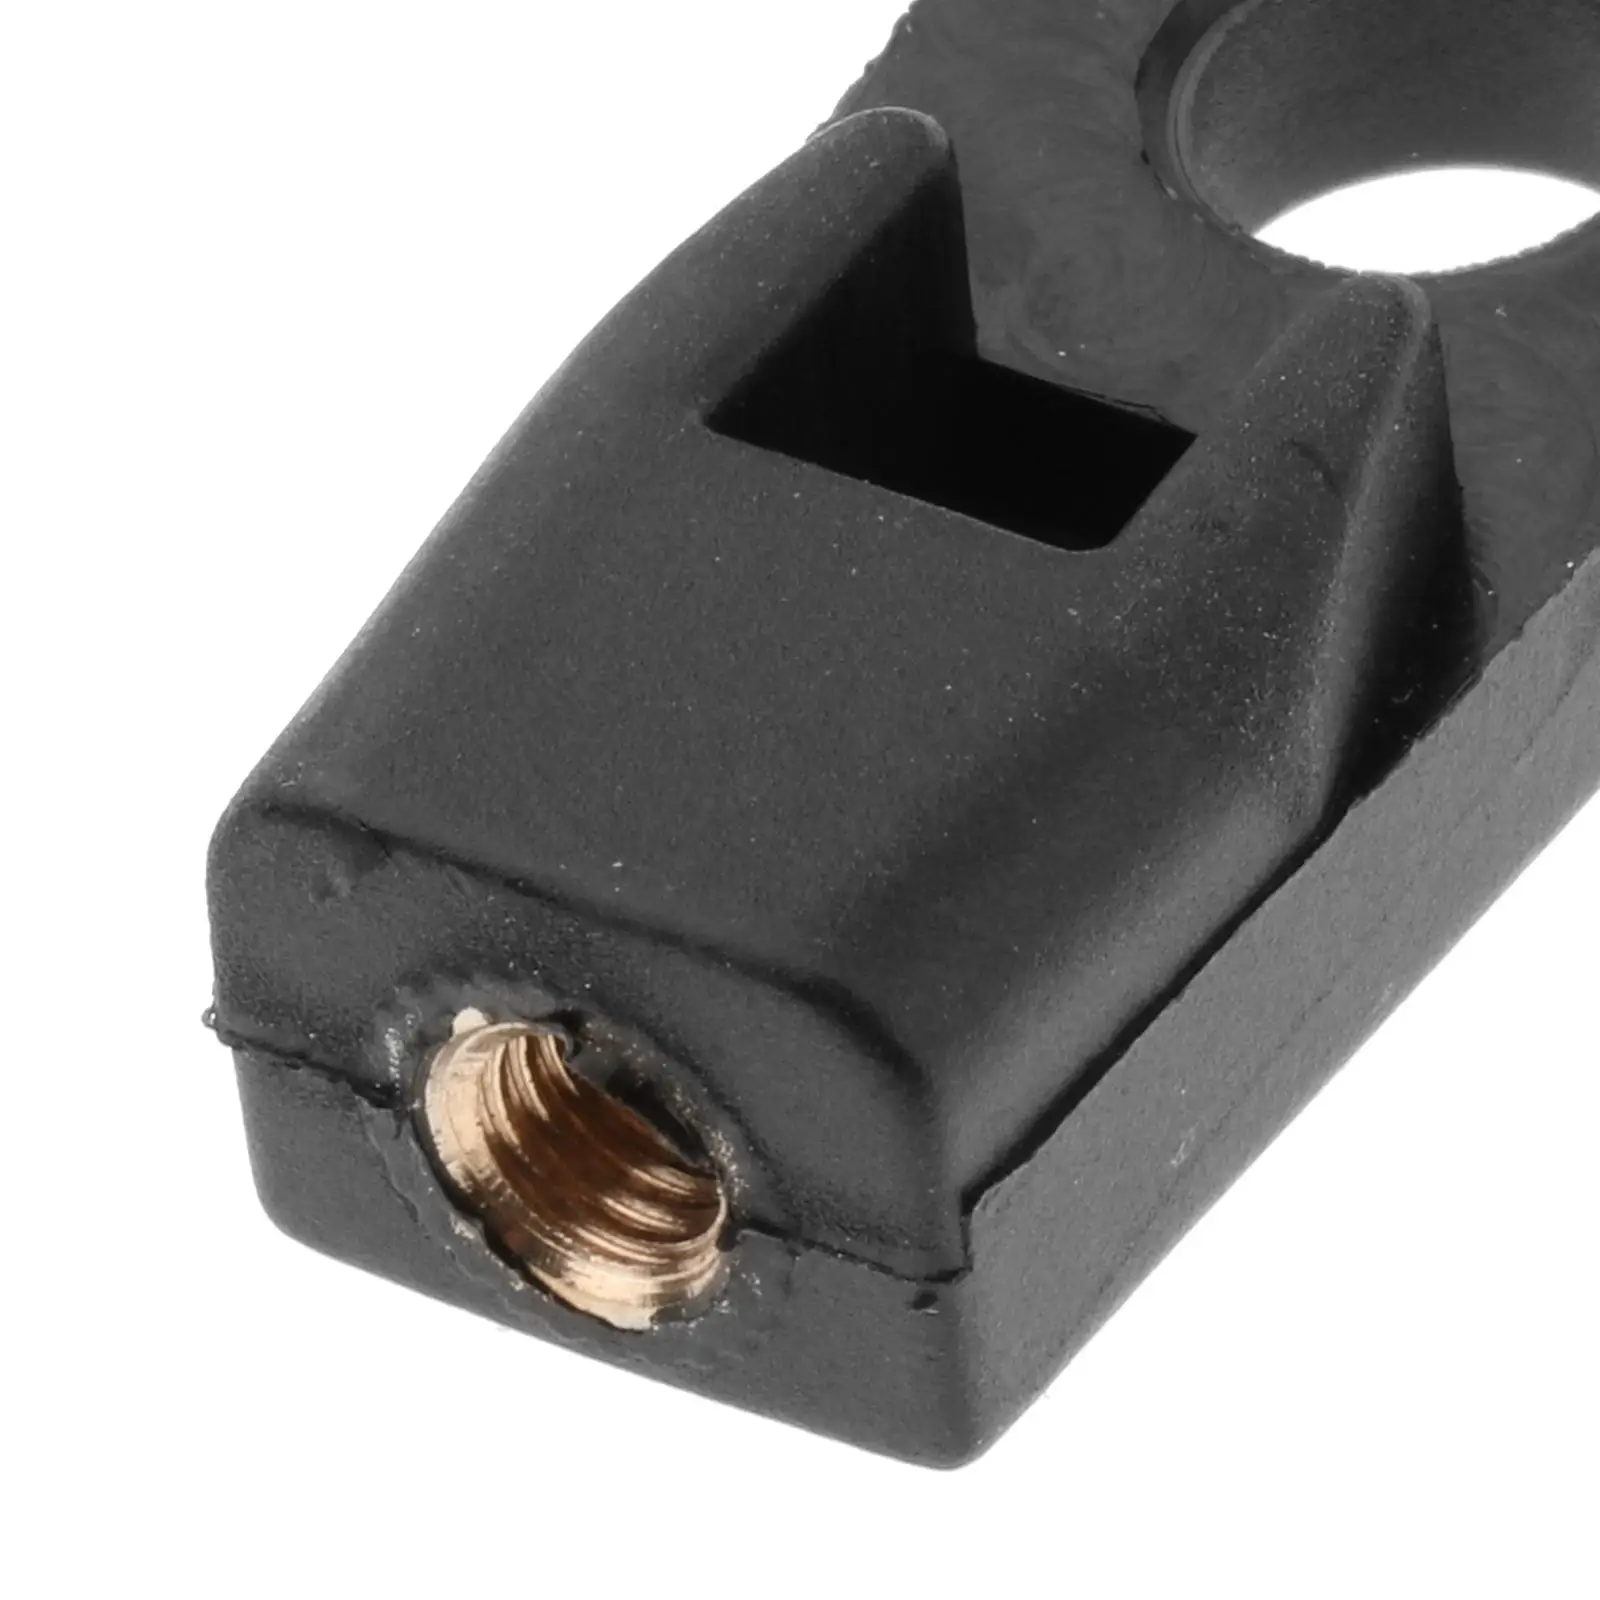 Cable End Connector for Suzuki Outboard Motor Spare Parts Replace Part Accessories